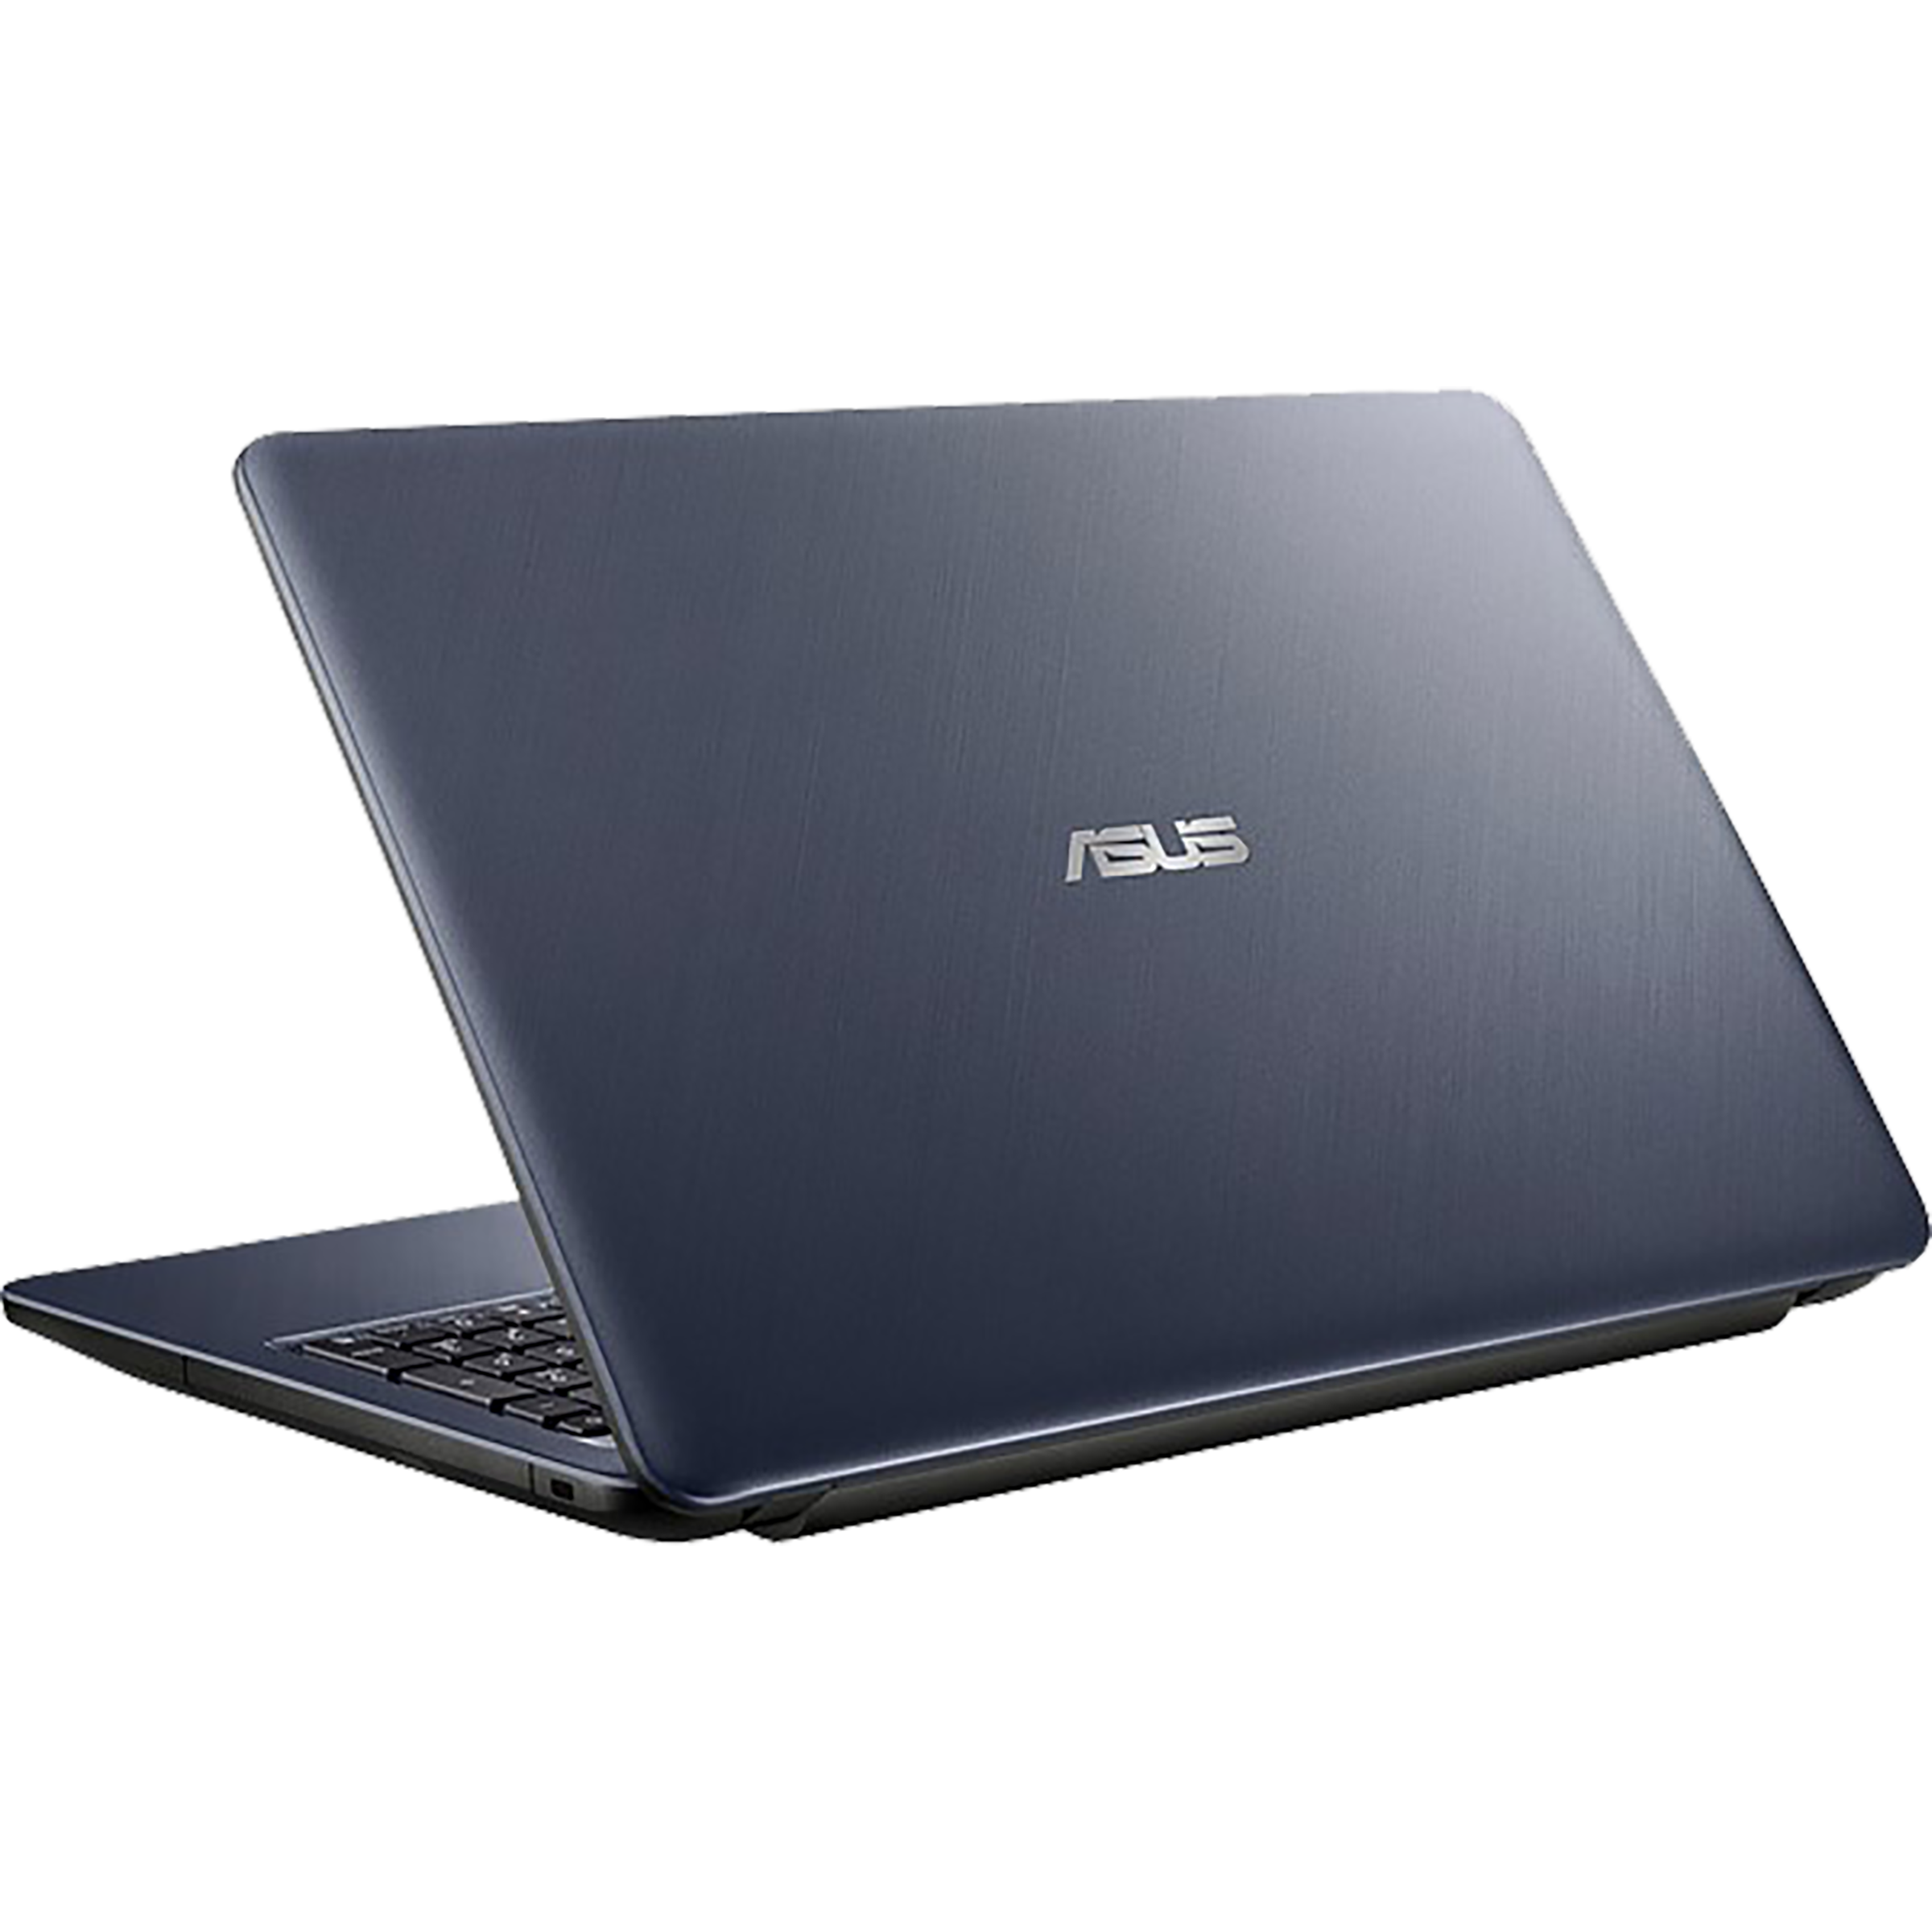 R543｜Laptops For Home｜ASUS USA